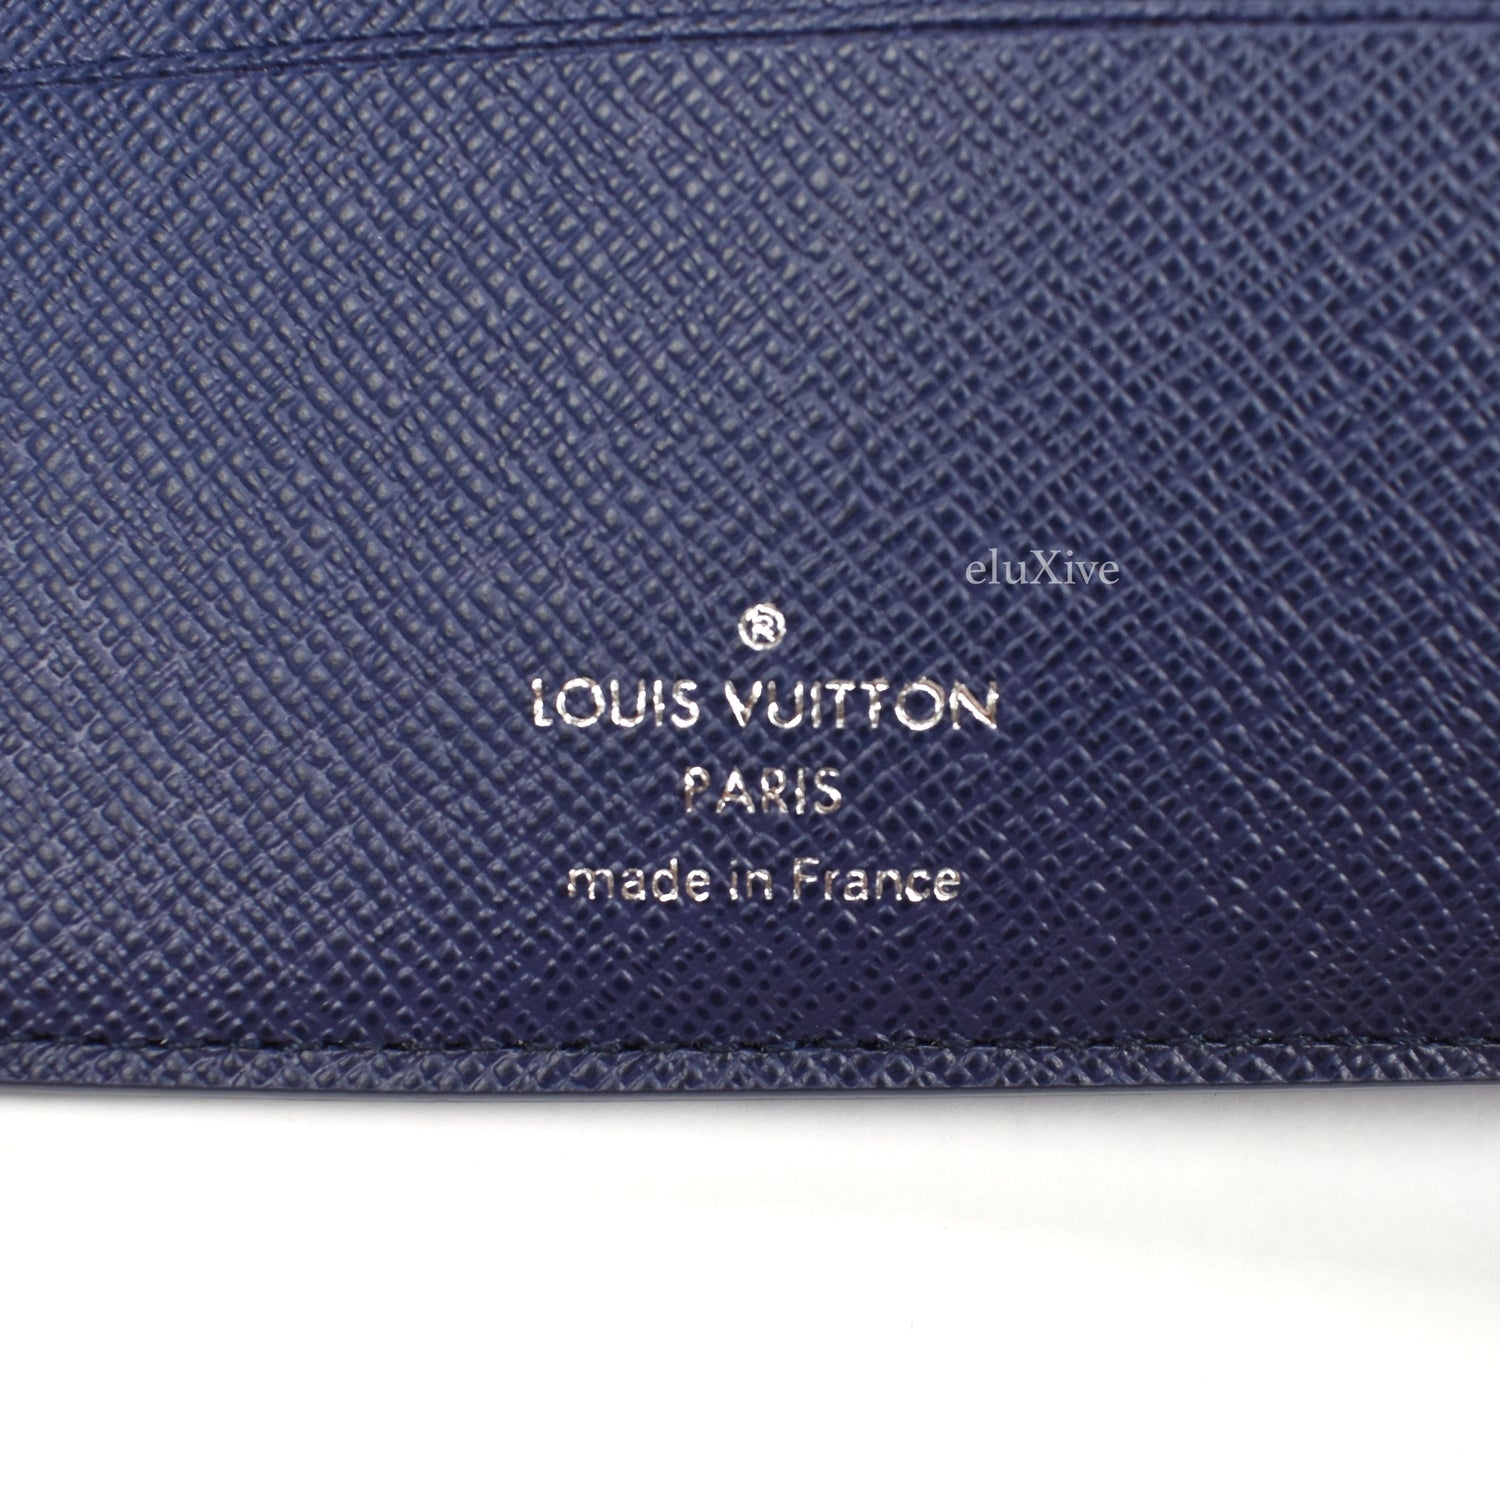 REAL LEATHER TOP QUALITY, Louis Vuitton Multiple Wallet Monogram Leather  M62901 (TOP QUALITY, 1:1 Reps, Pls Contact Whatsapp at +8618559333945 to  make an order or check details. Wholesale and retail worldwide.) :  r/Suplookbag